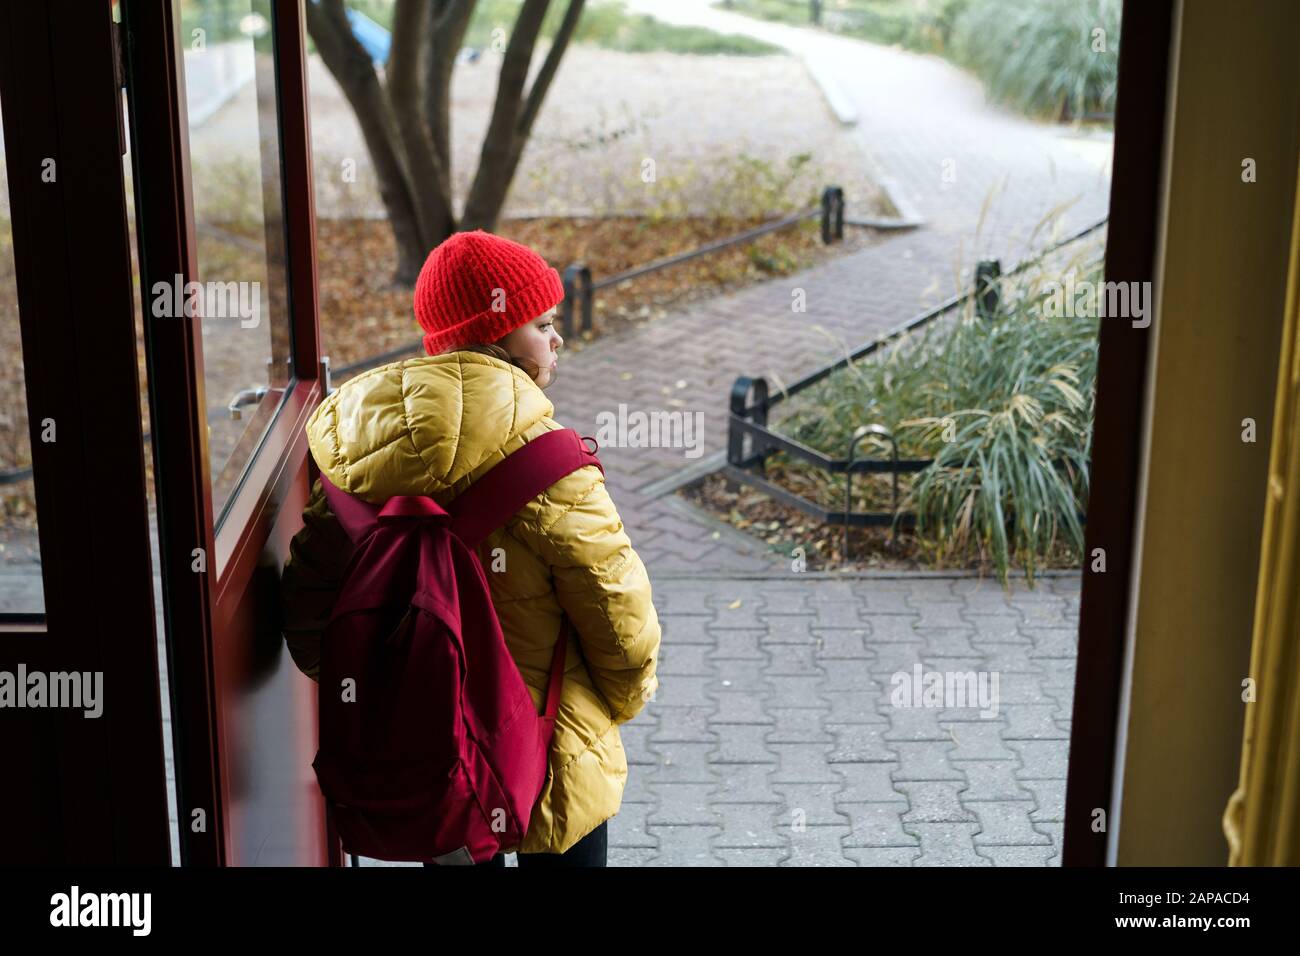 Girl 12 years old schoolgirl leaving the house with a backpack opening the door Stock Photo